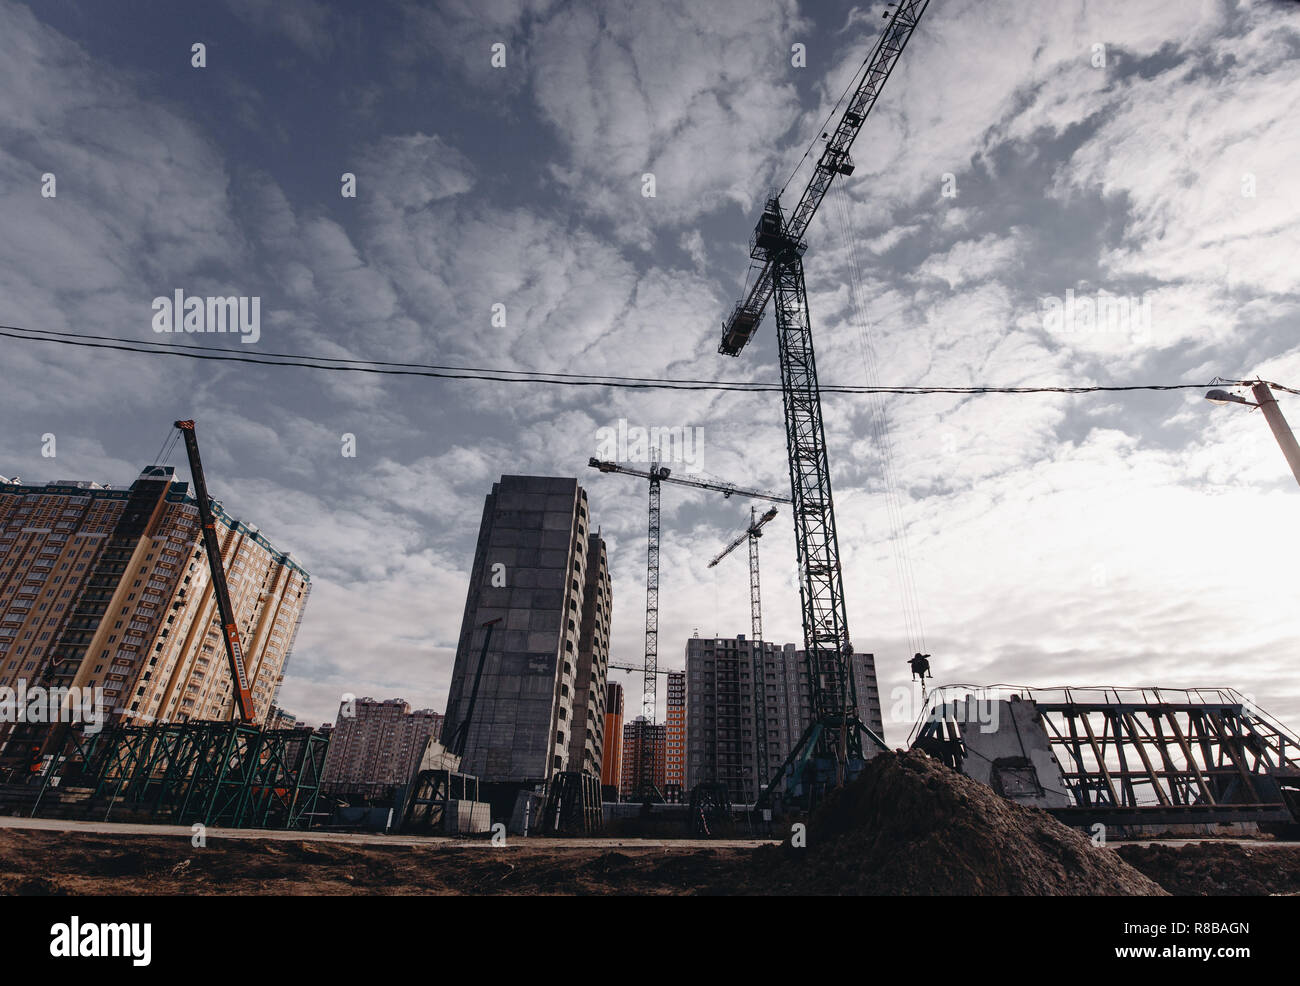 View of the construction site with cranes and high-rise residential buildings. Stock Photo